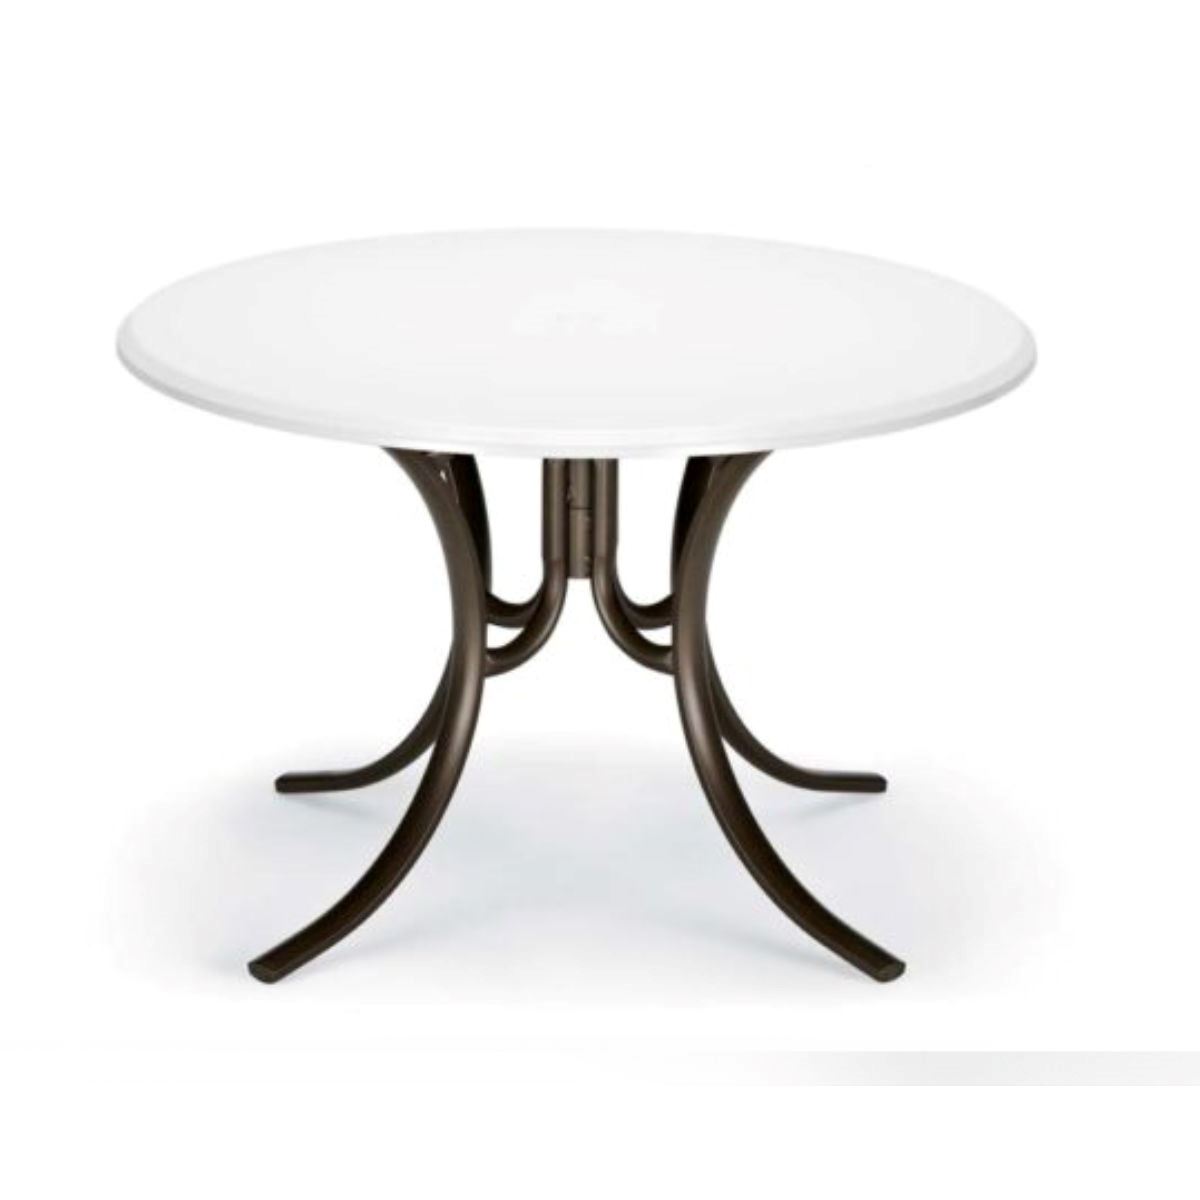 Dining Table 42 Inch Round Werzalit, Round Table 42 Inches